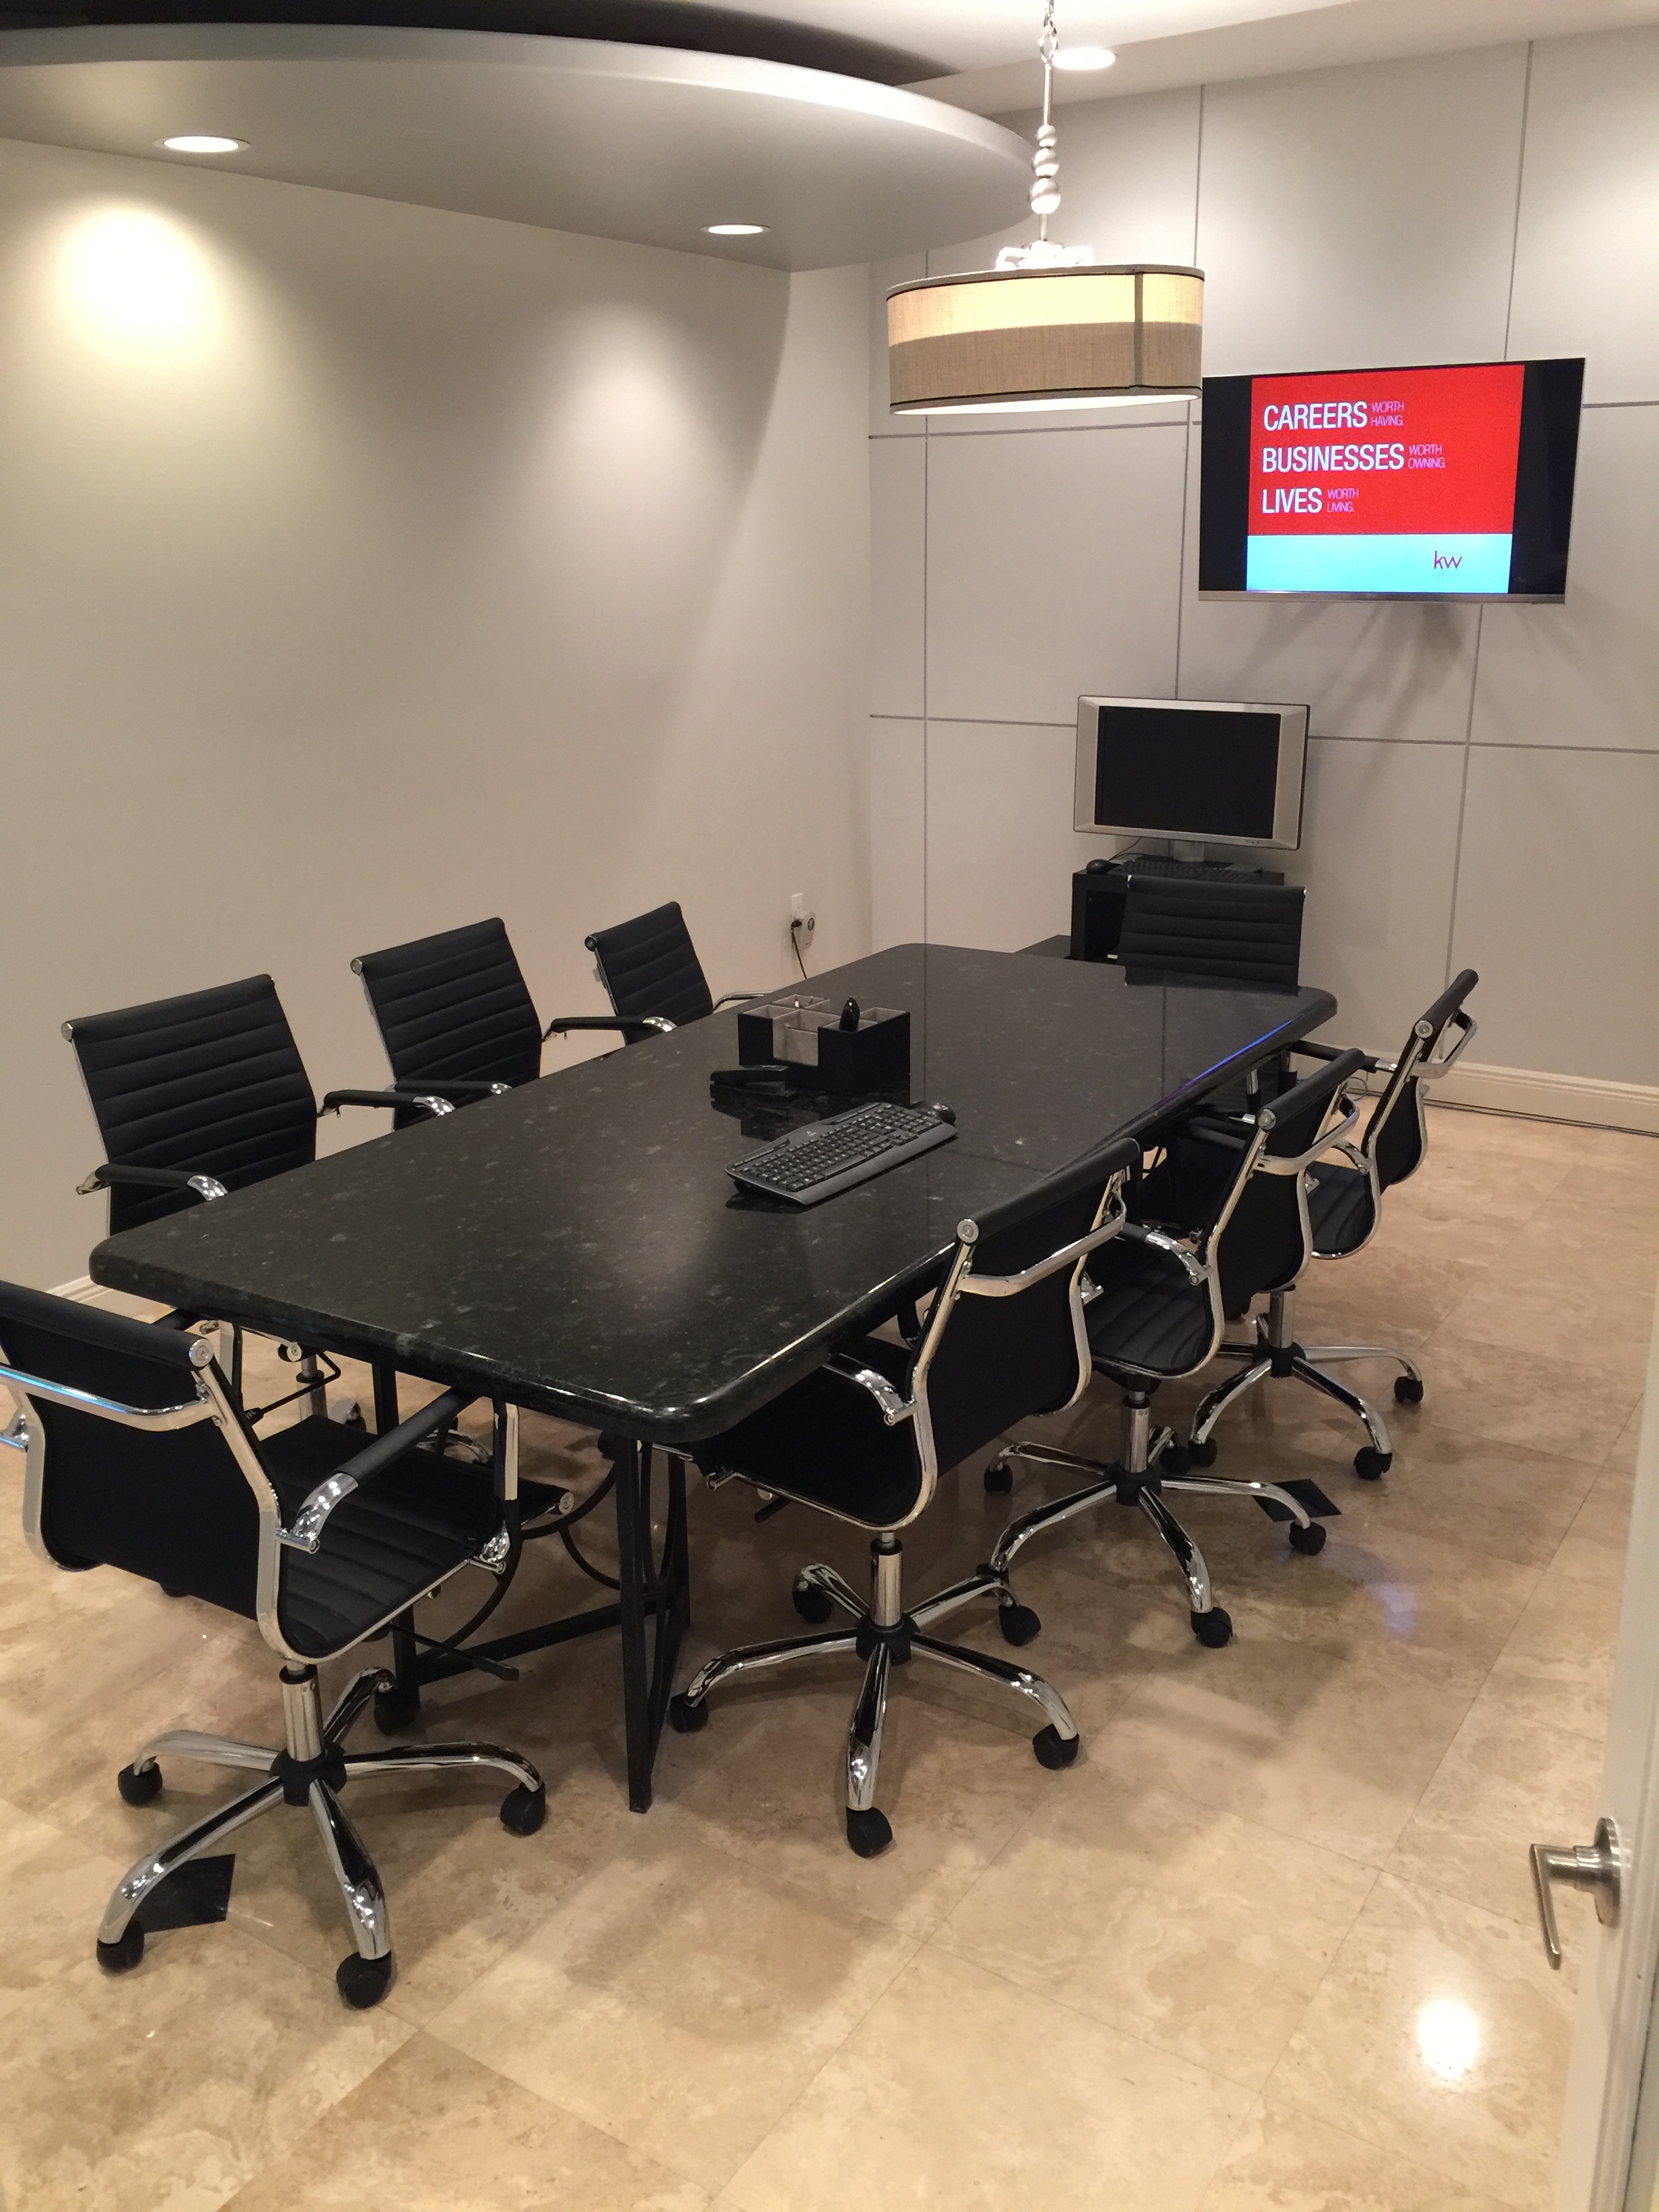 Conference Rooms at Keller Williams Legacy Weston get upgraded with Fiber Optic Technology